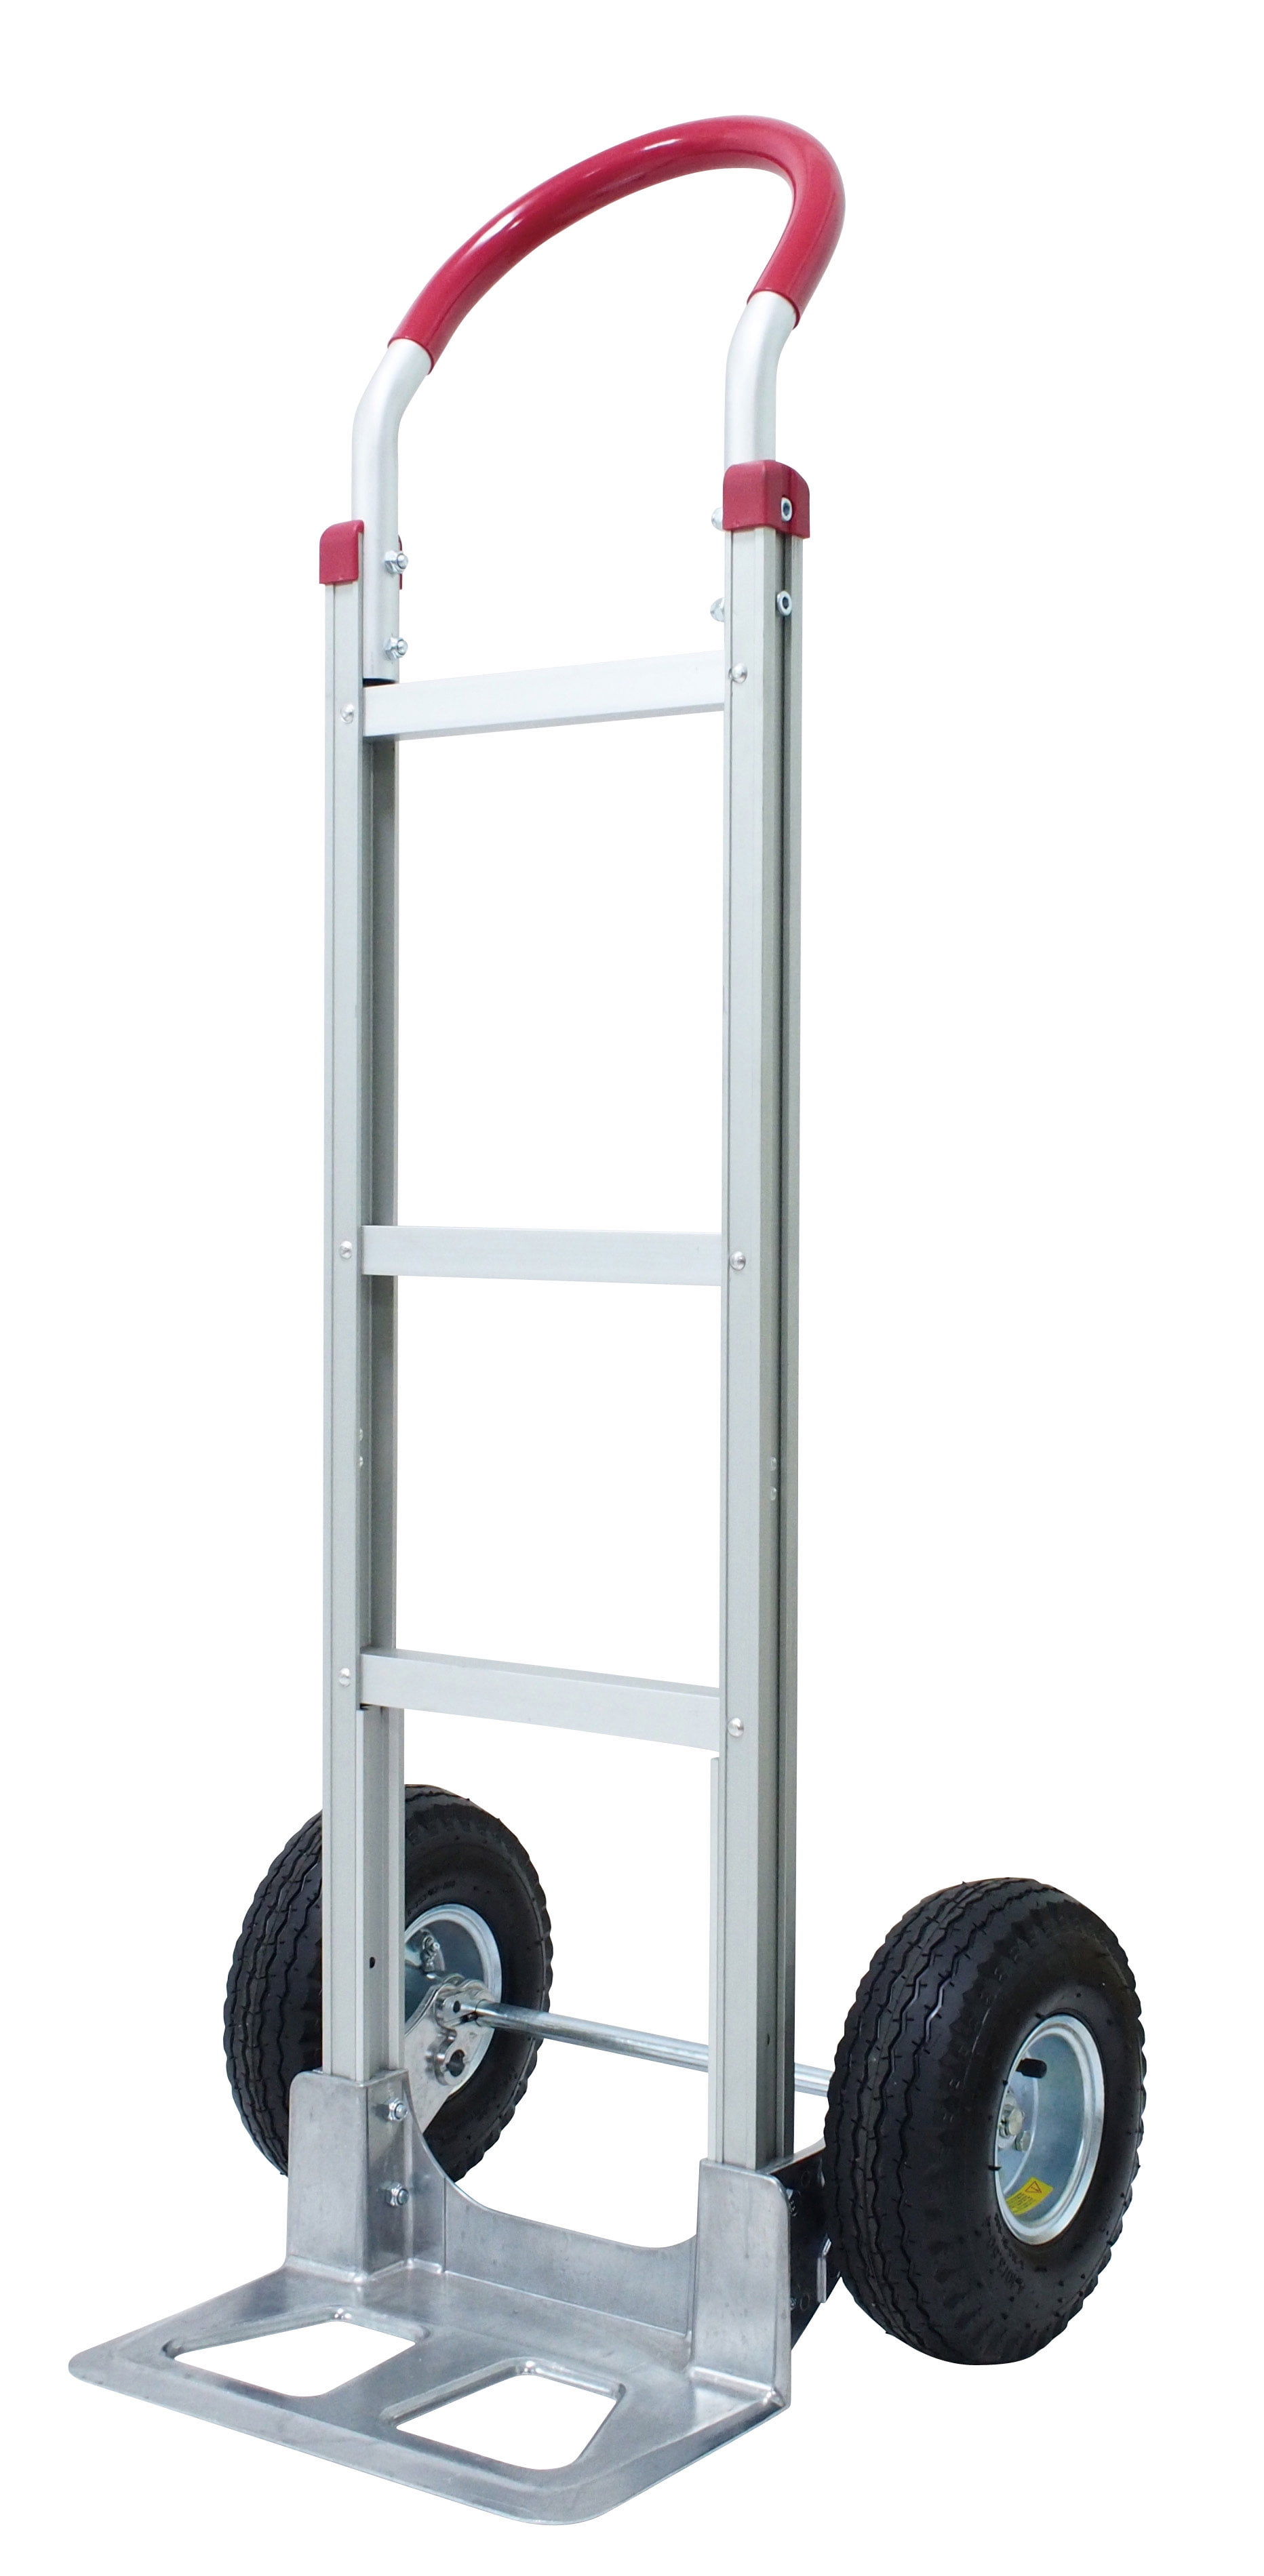 Tyke Supply Stair Climber Aluminum Hand Truck Commercial Quality 